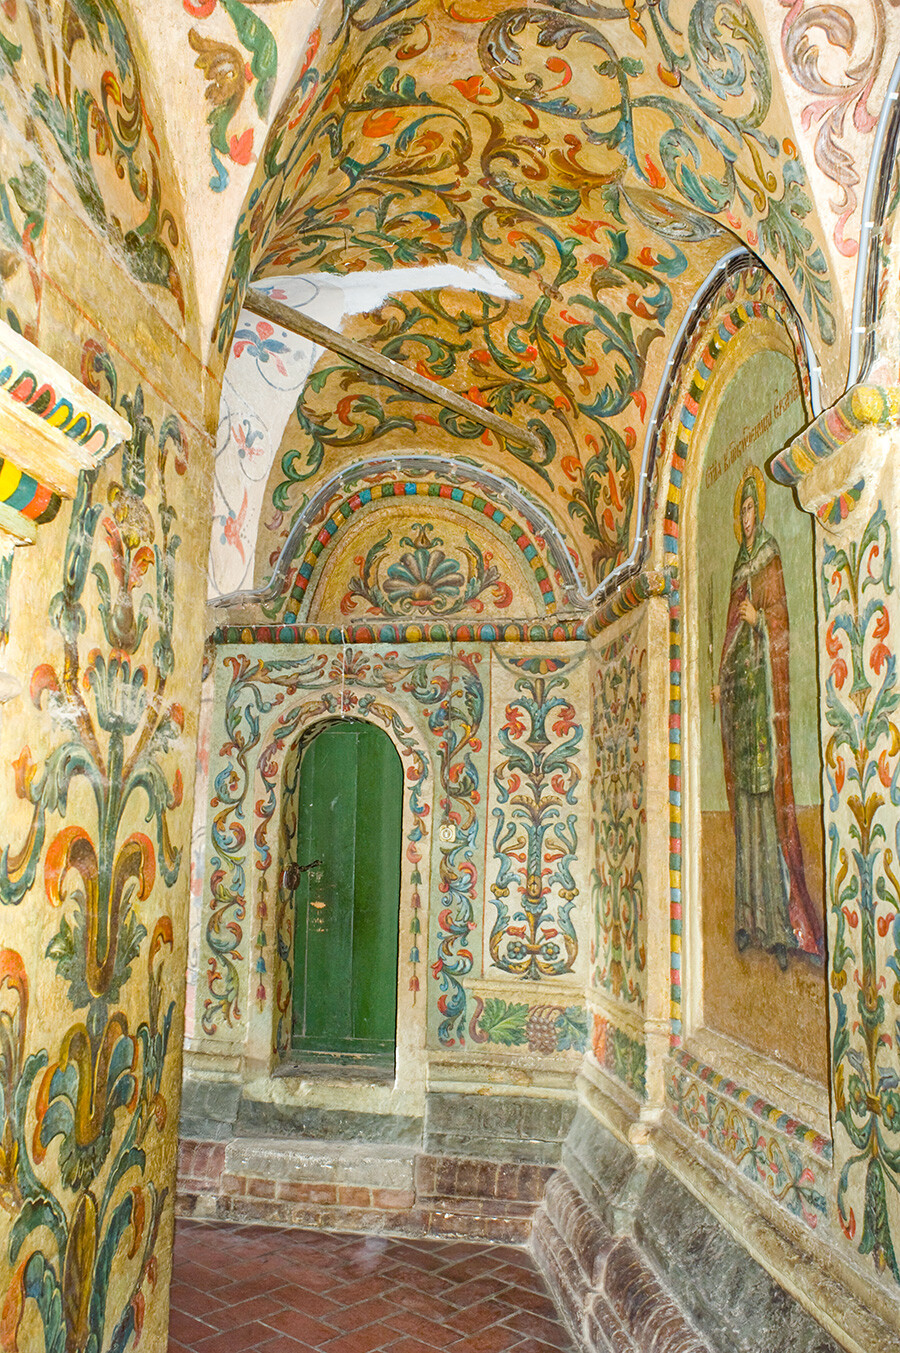 St. Basil's, interior. South gallery passage with 18th-century wall paintings. Left: painting of St. Catherine. June 2, 2012.